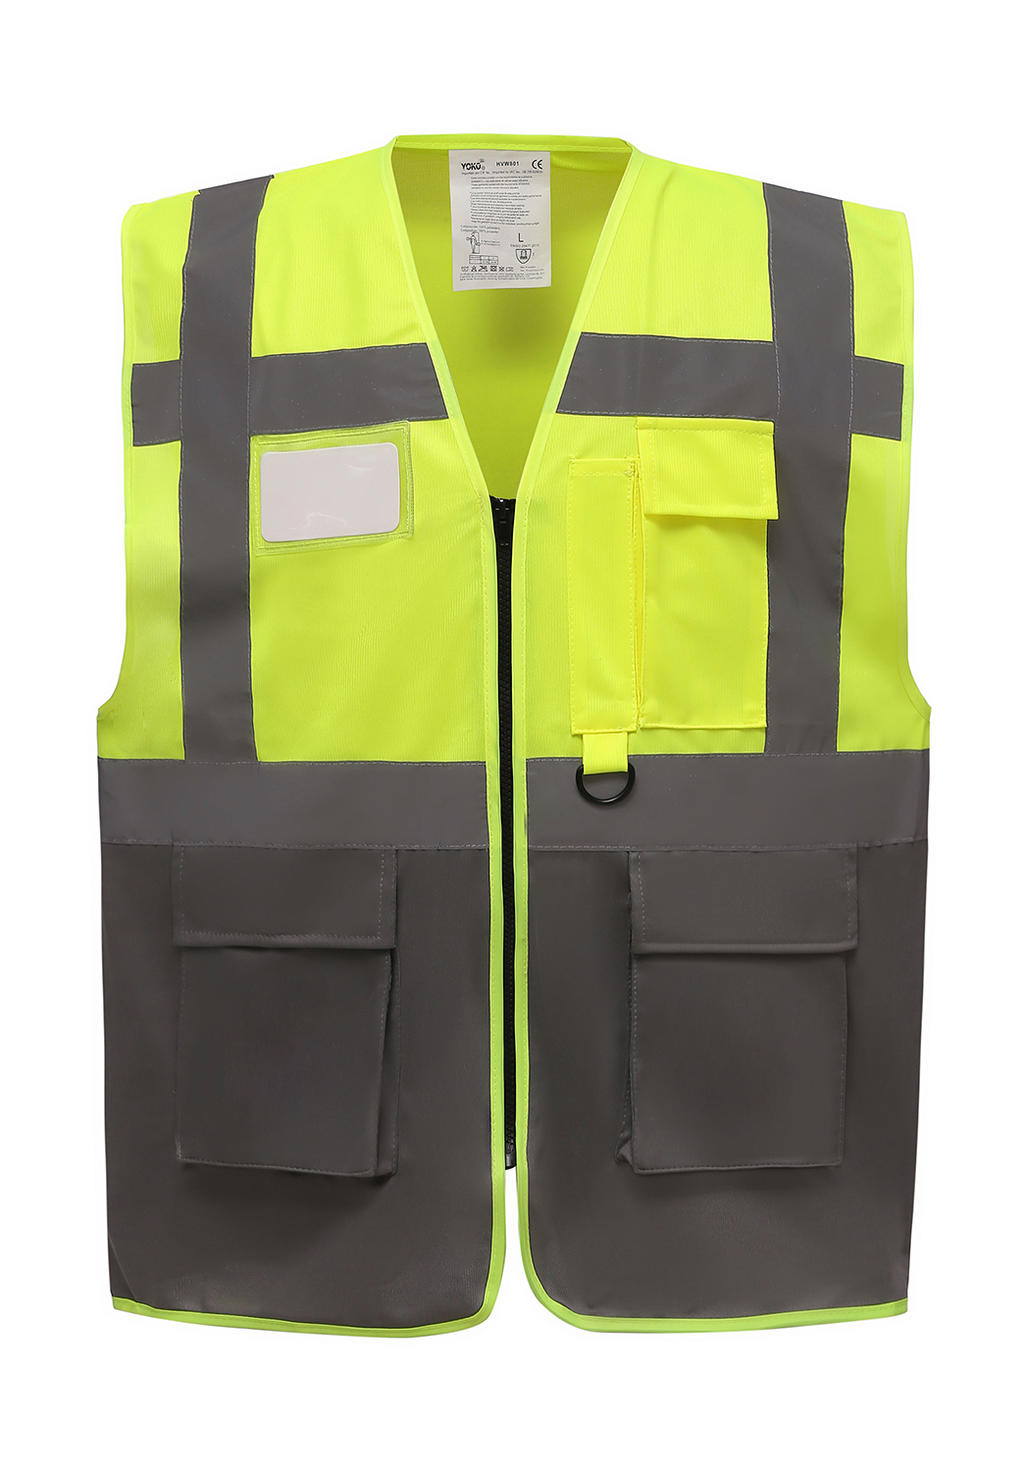  Fluo Executive Waistcoat in Farbe Fluo Yellow/Grey